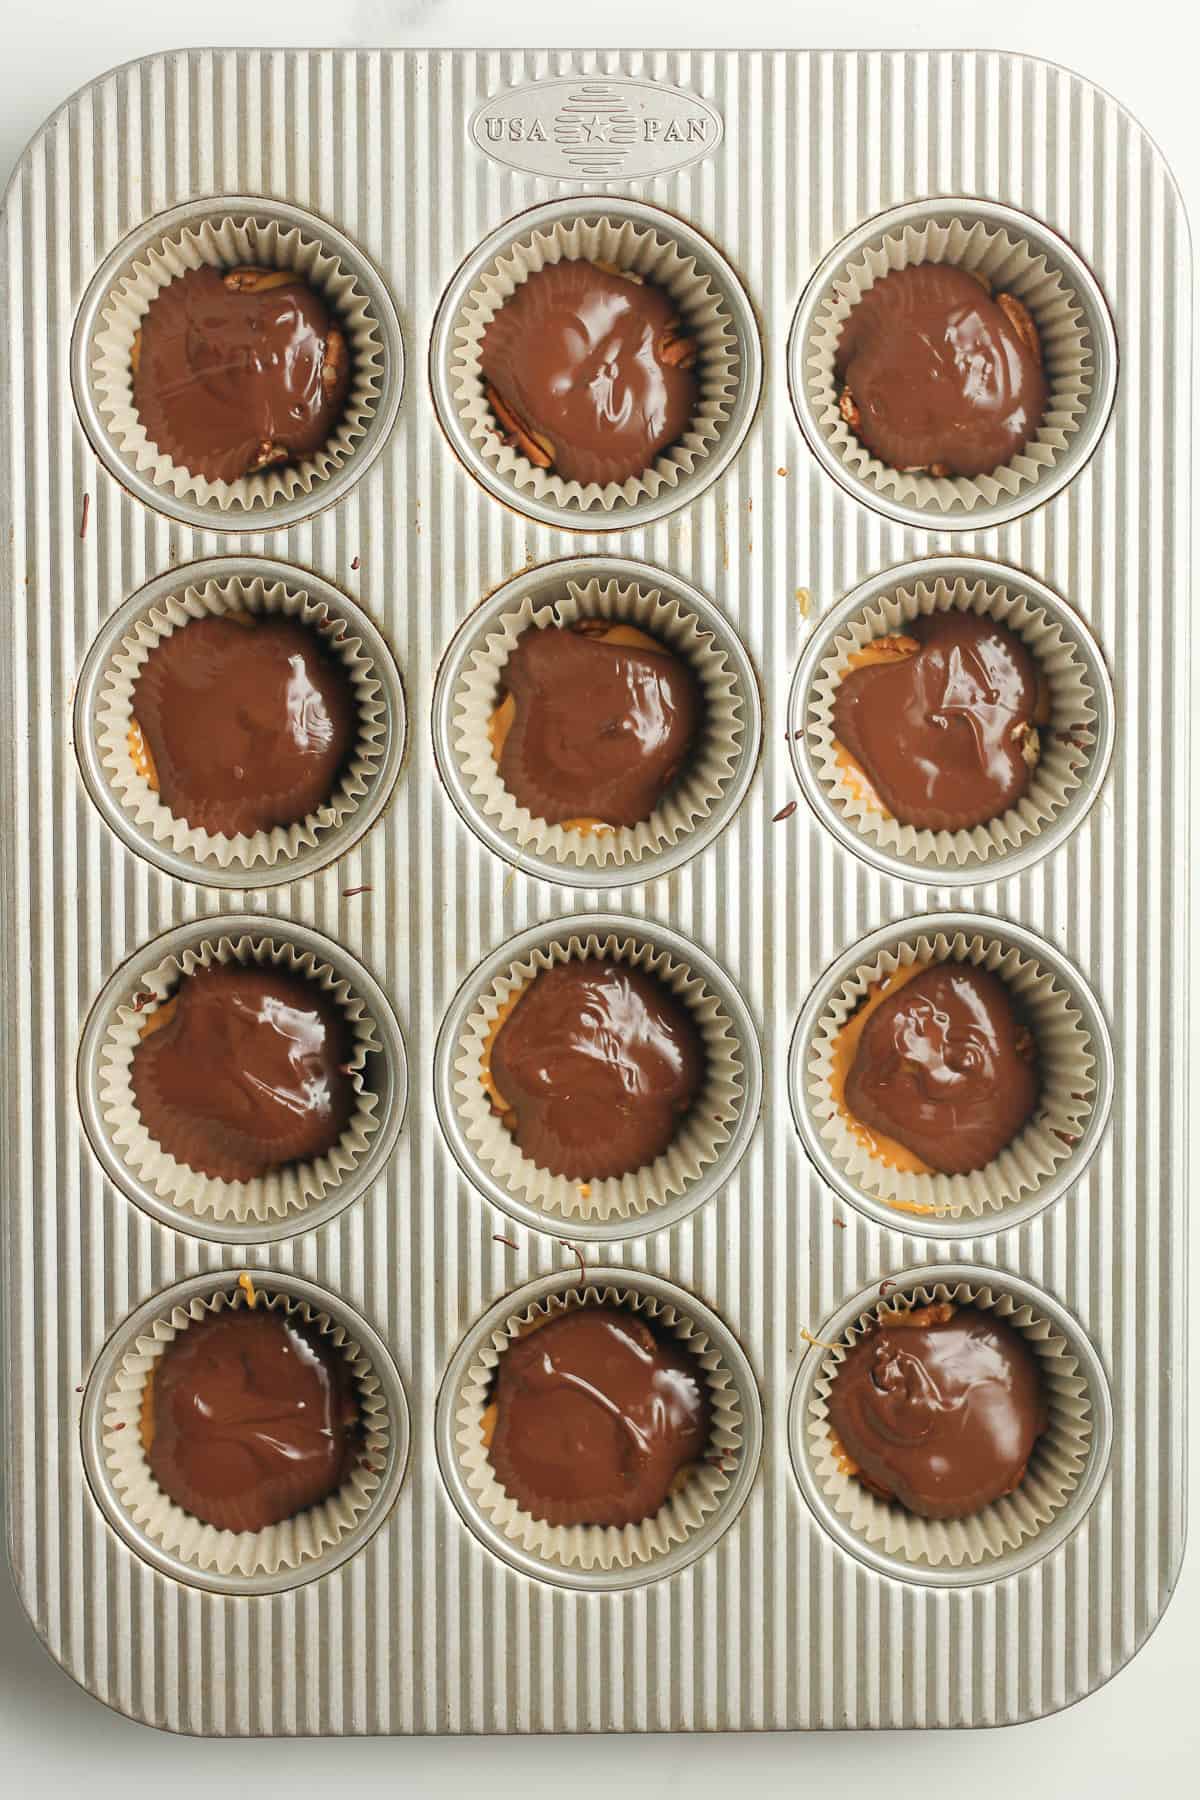 A 12-cup muffin tin with chocolate turtles in parchment liners.